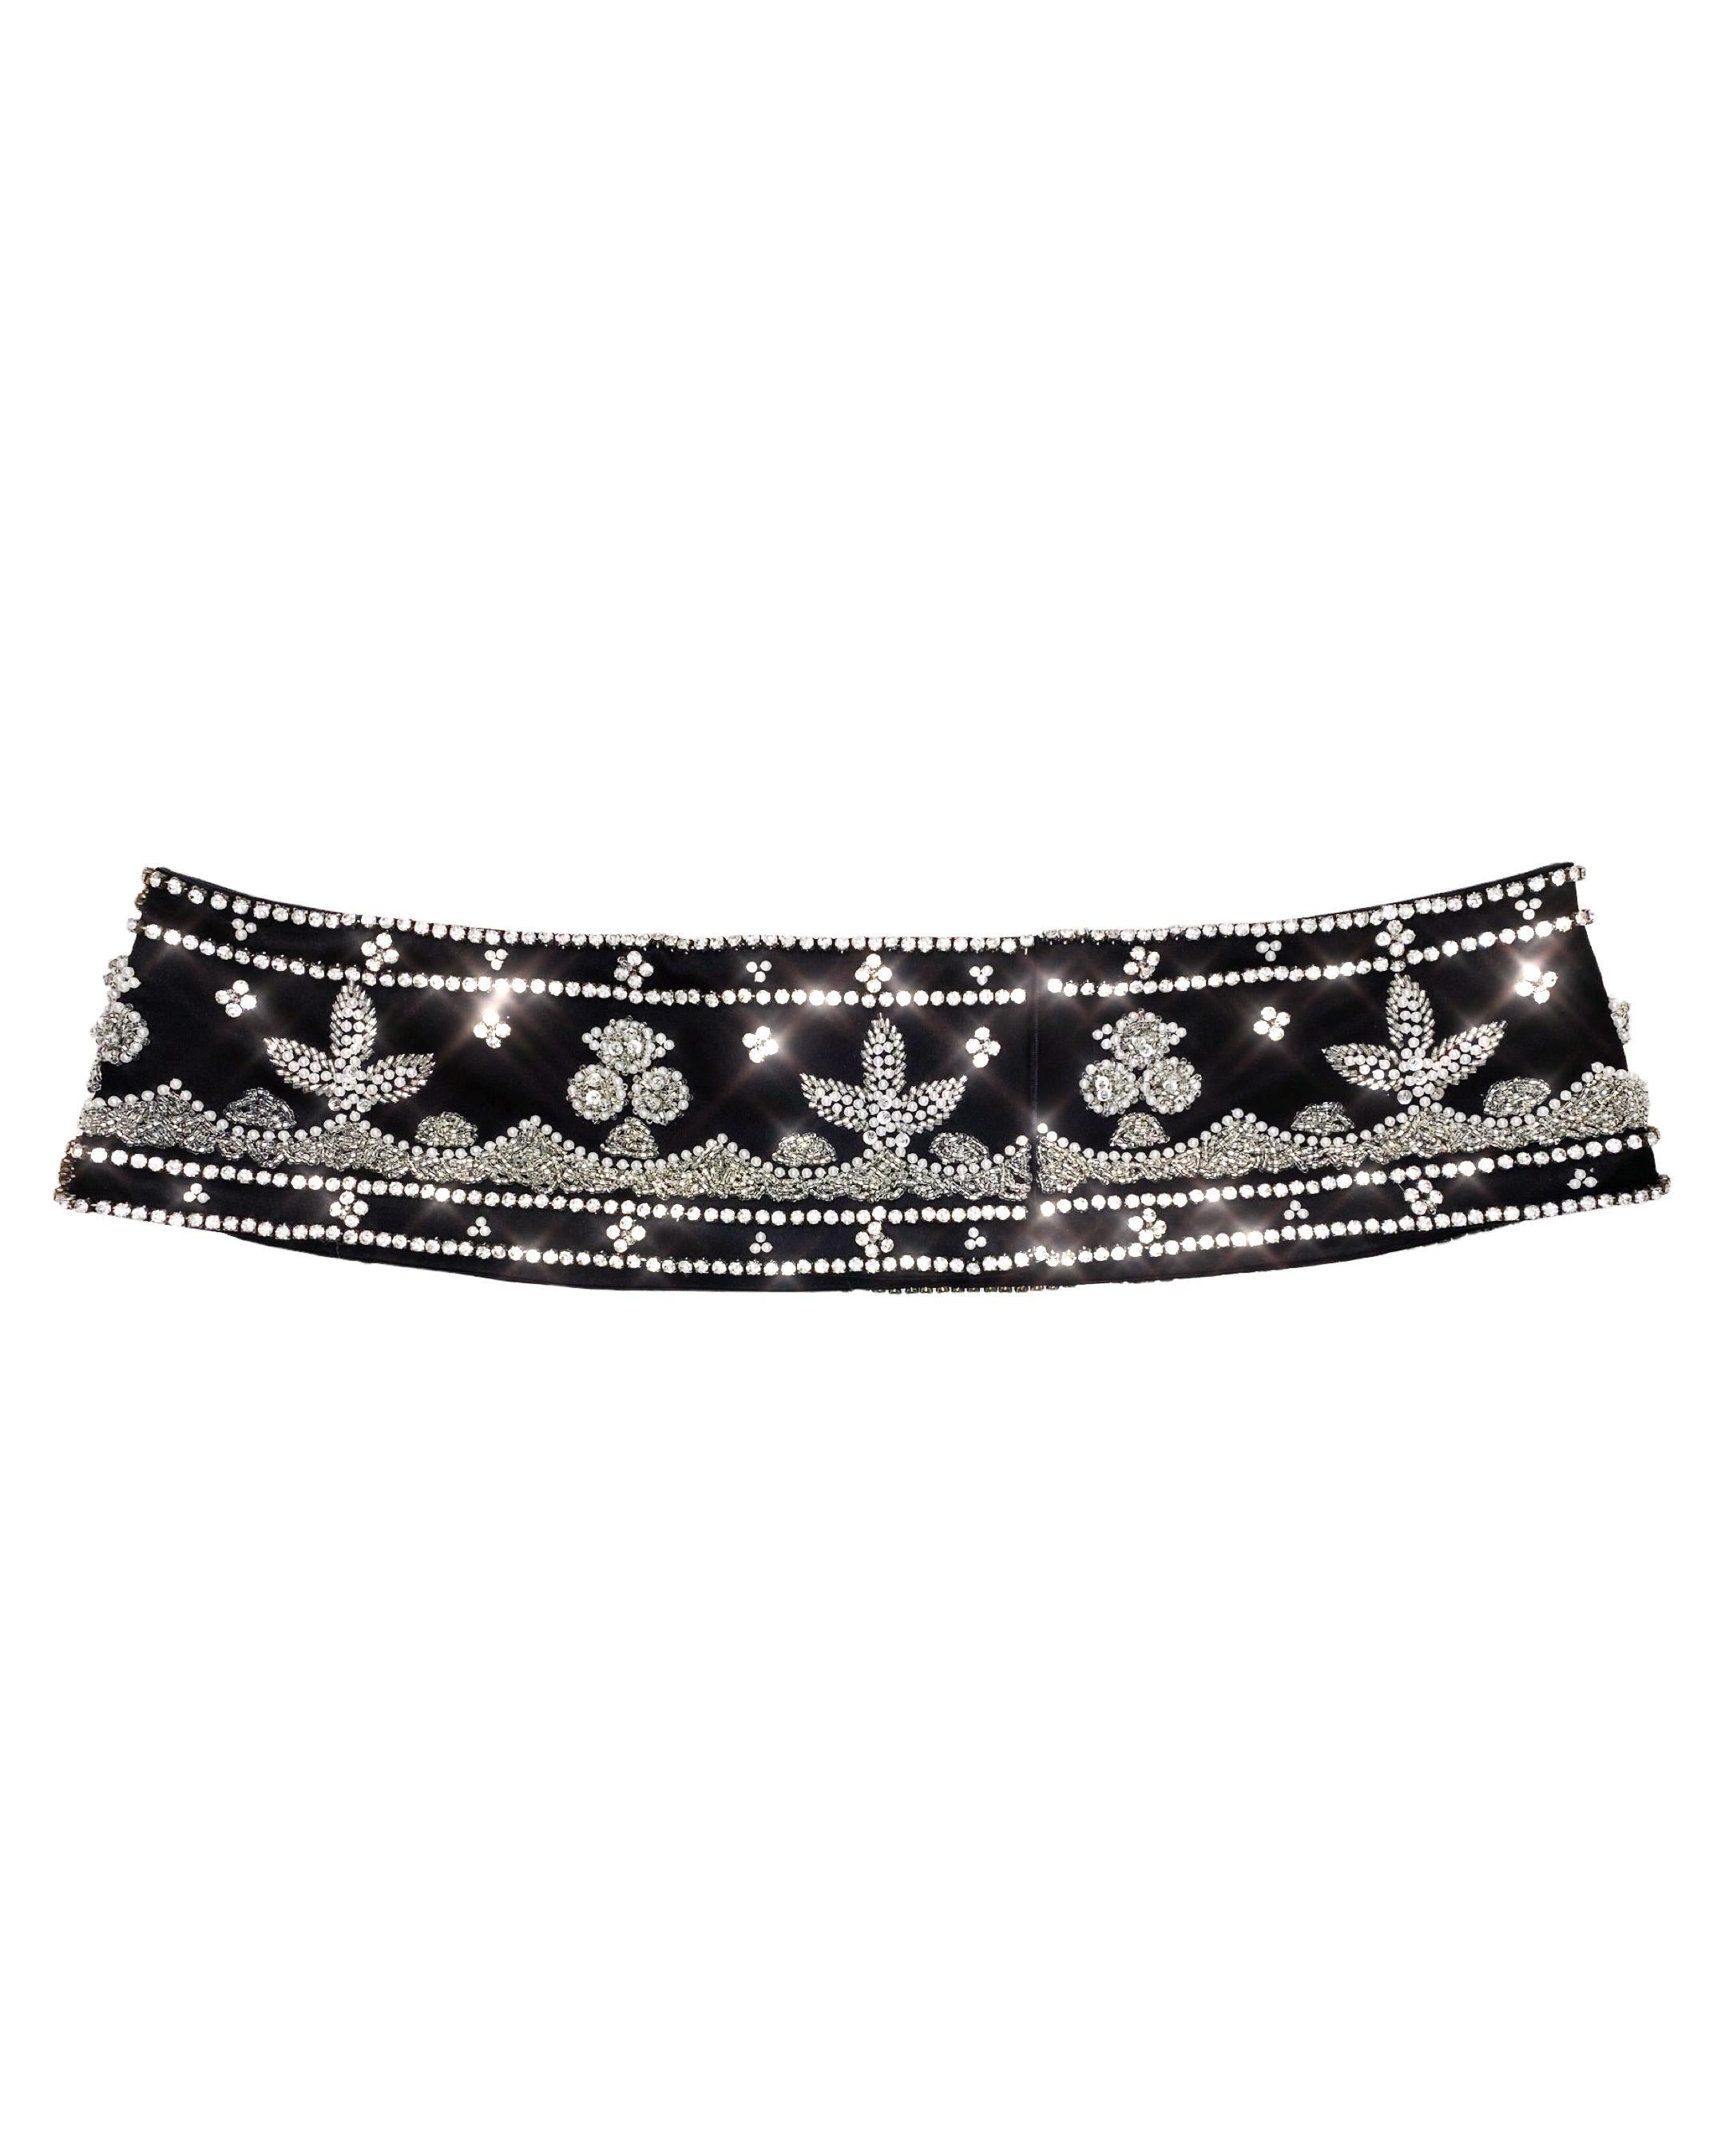 Dolce & Gabbana Fall 1999 Embellished Silk Belt In Excellent Condition For Sale In Prague, CZ